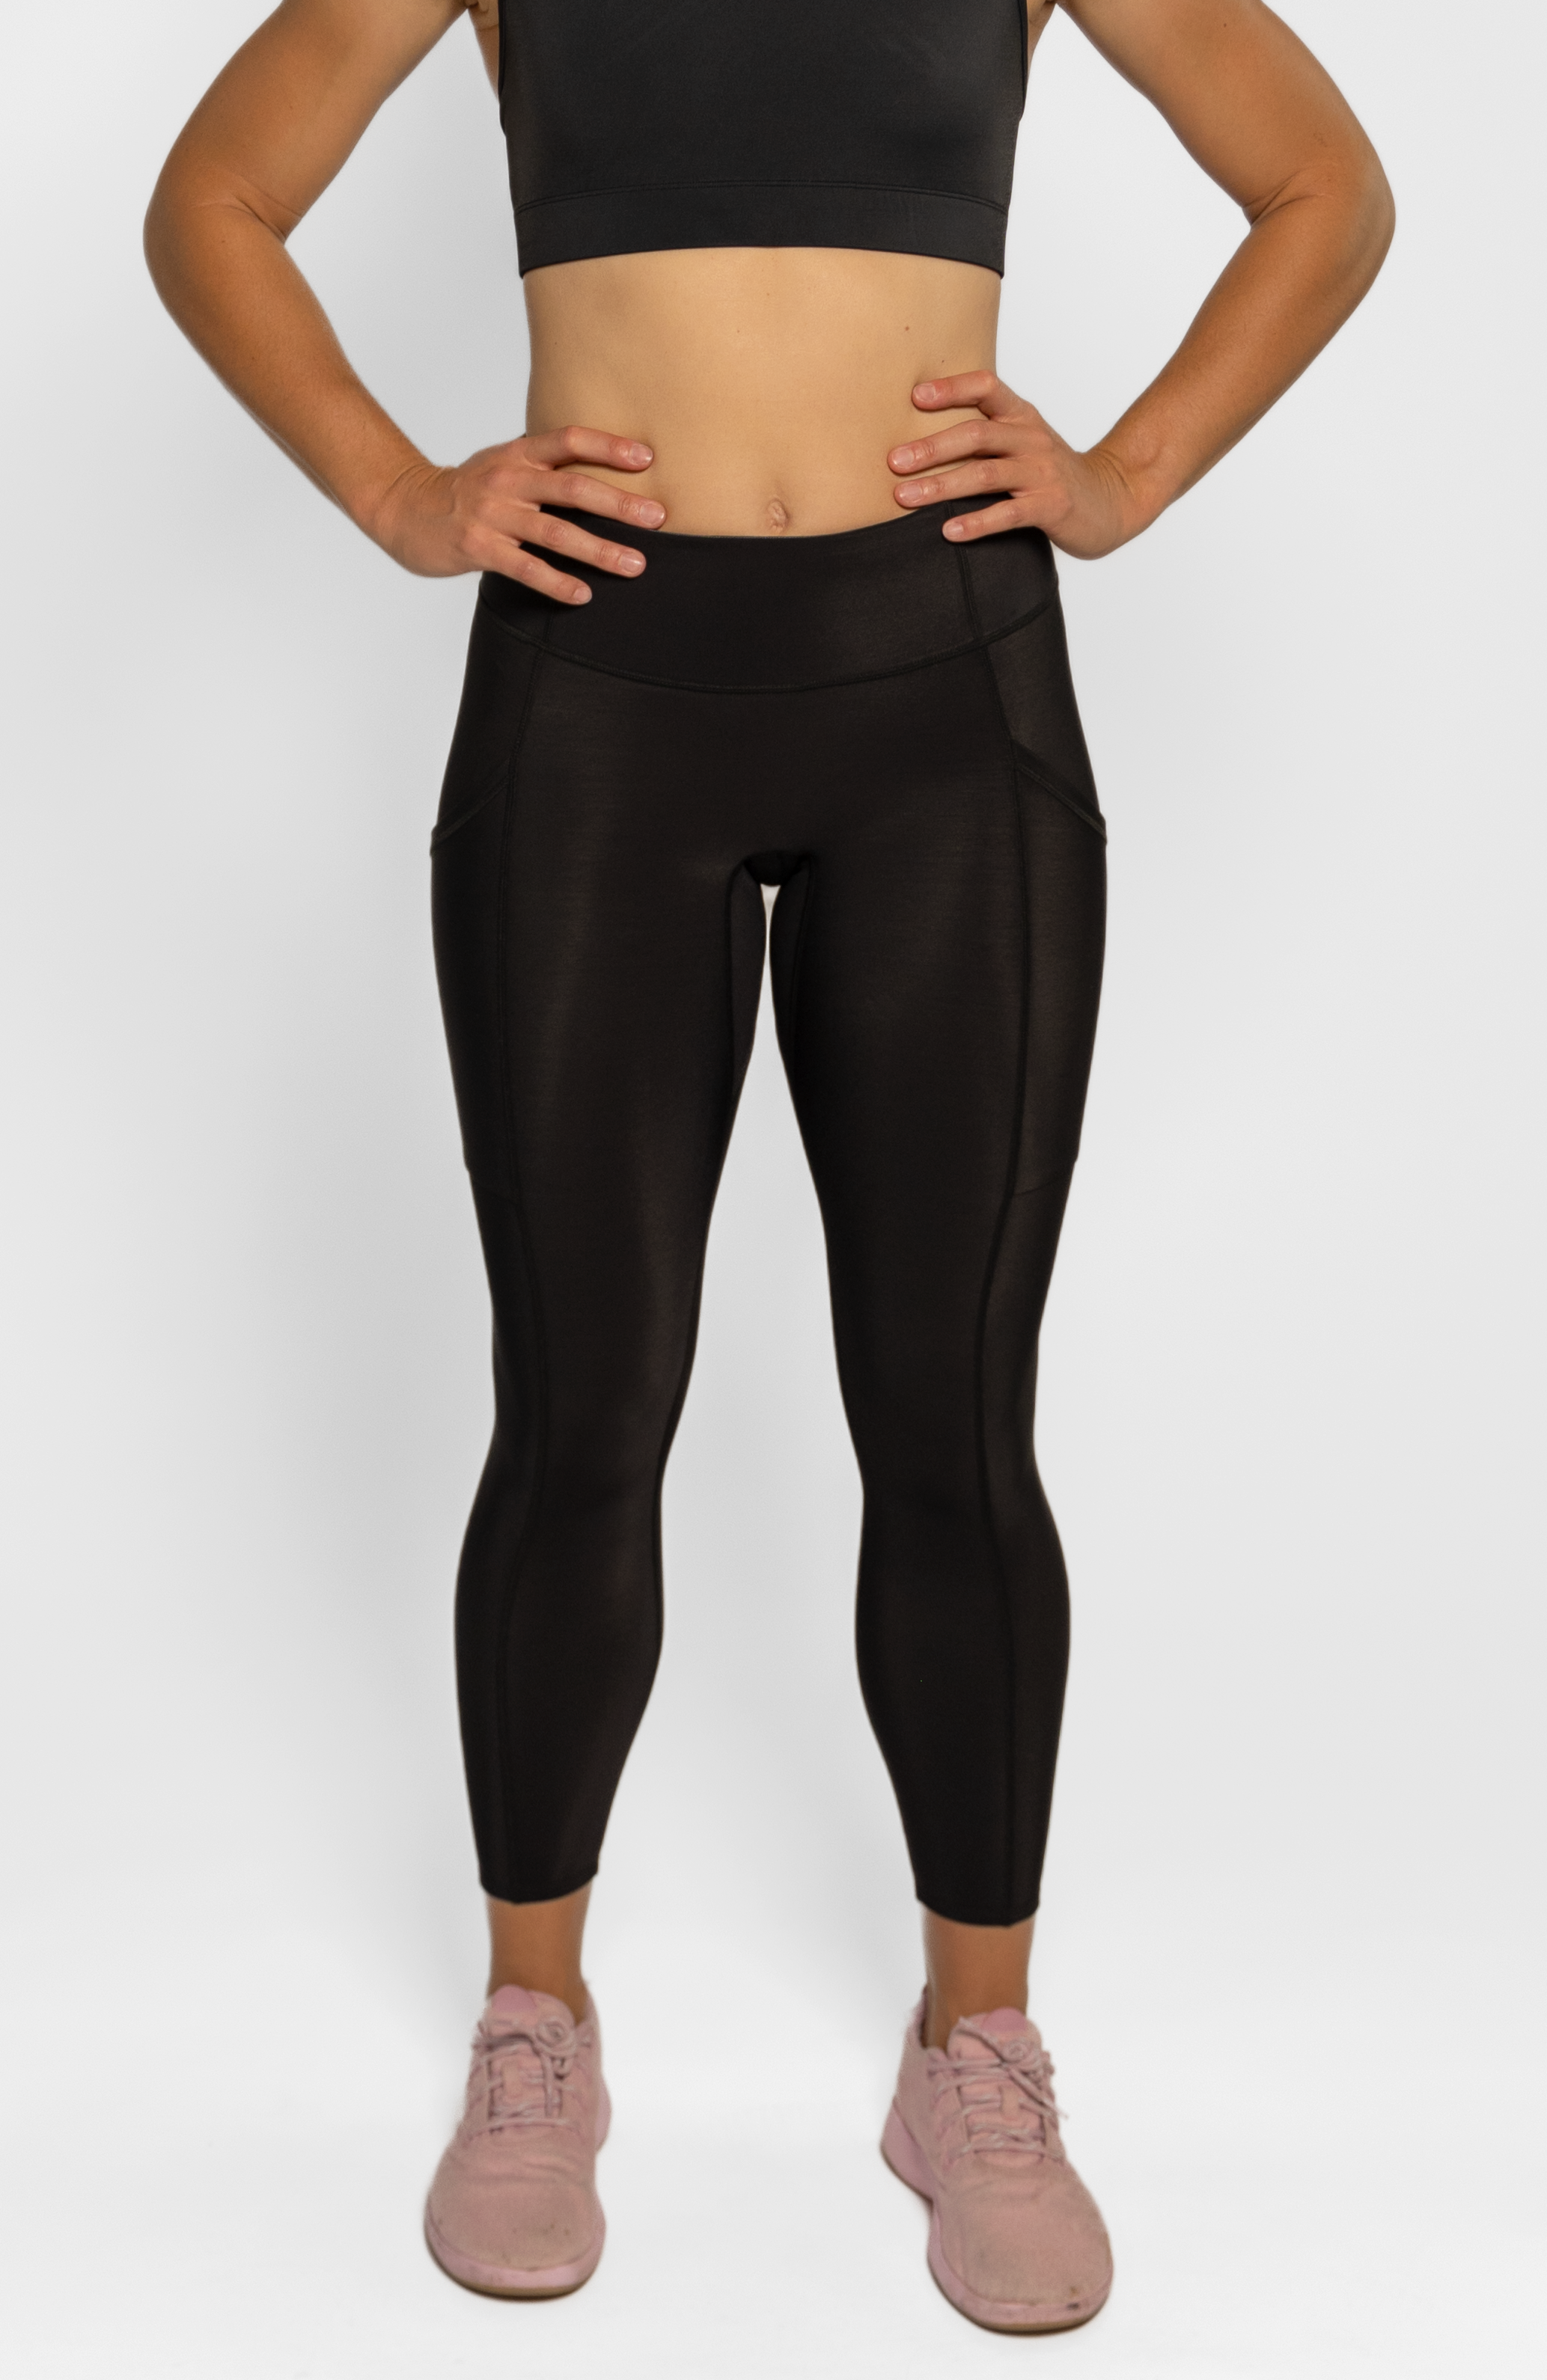 CompressionZ Super High Waisted Women's Leggings - Plus Size Compression  Pants Yoga Running Gym & Fitness (Black, XXL) 